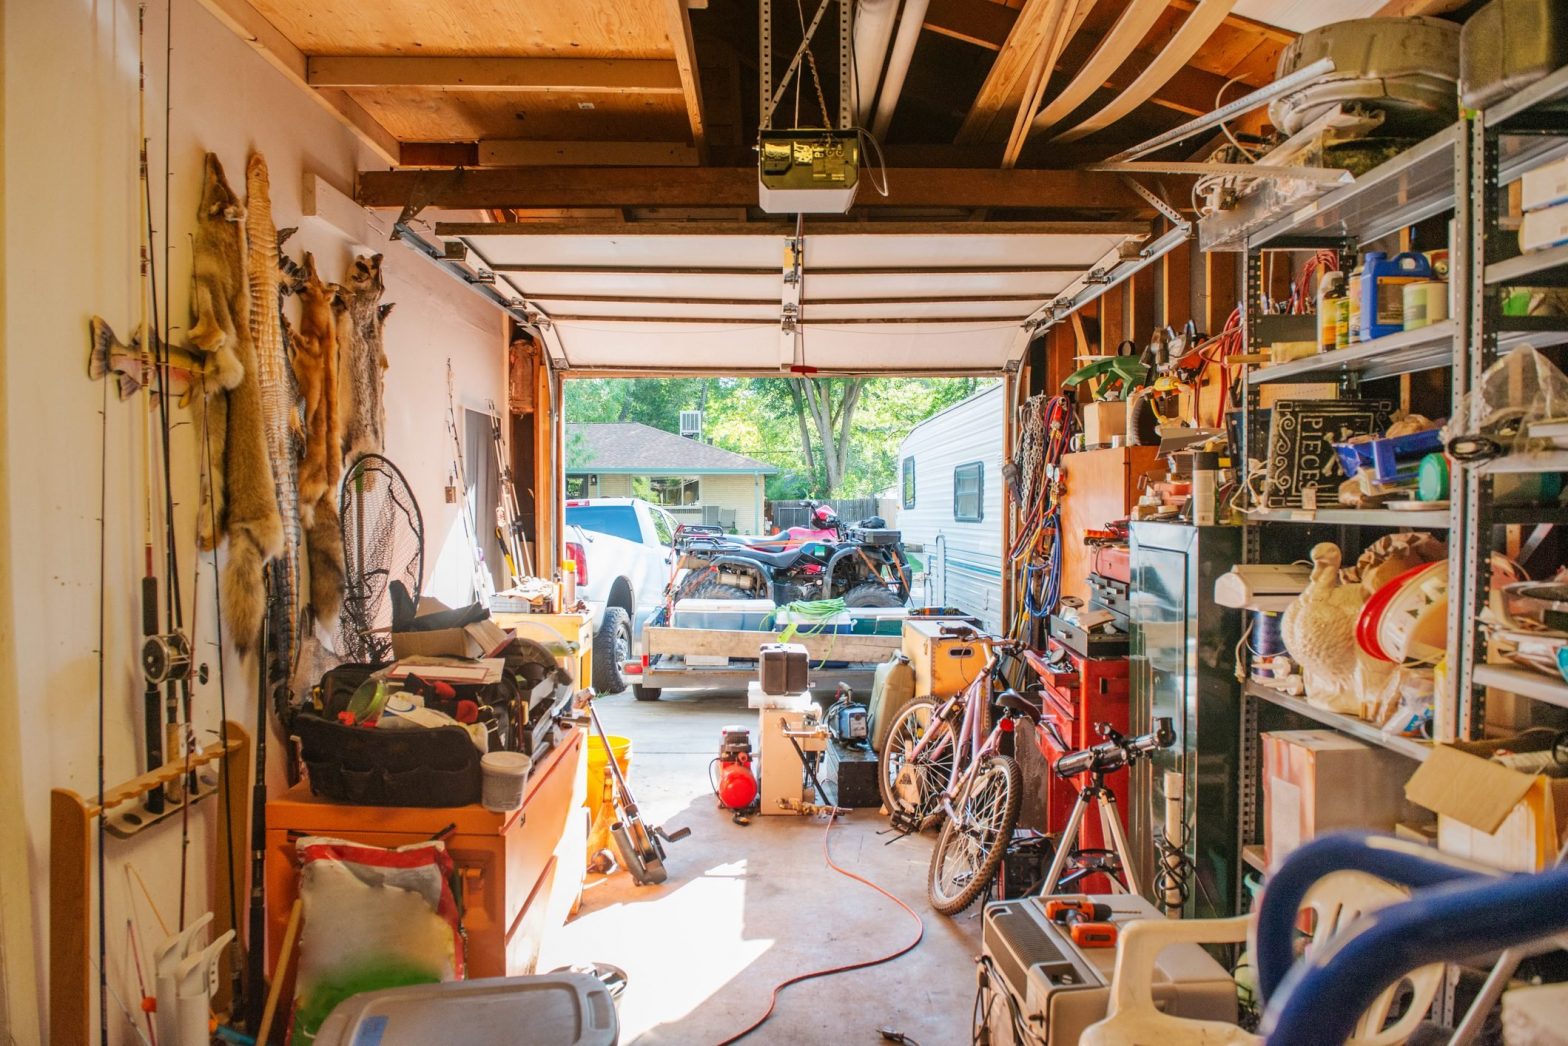 Garage Clean-Up: 4 Things to Get Rid of Now